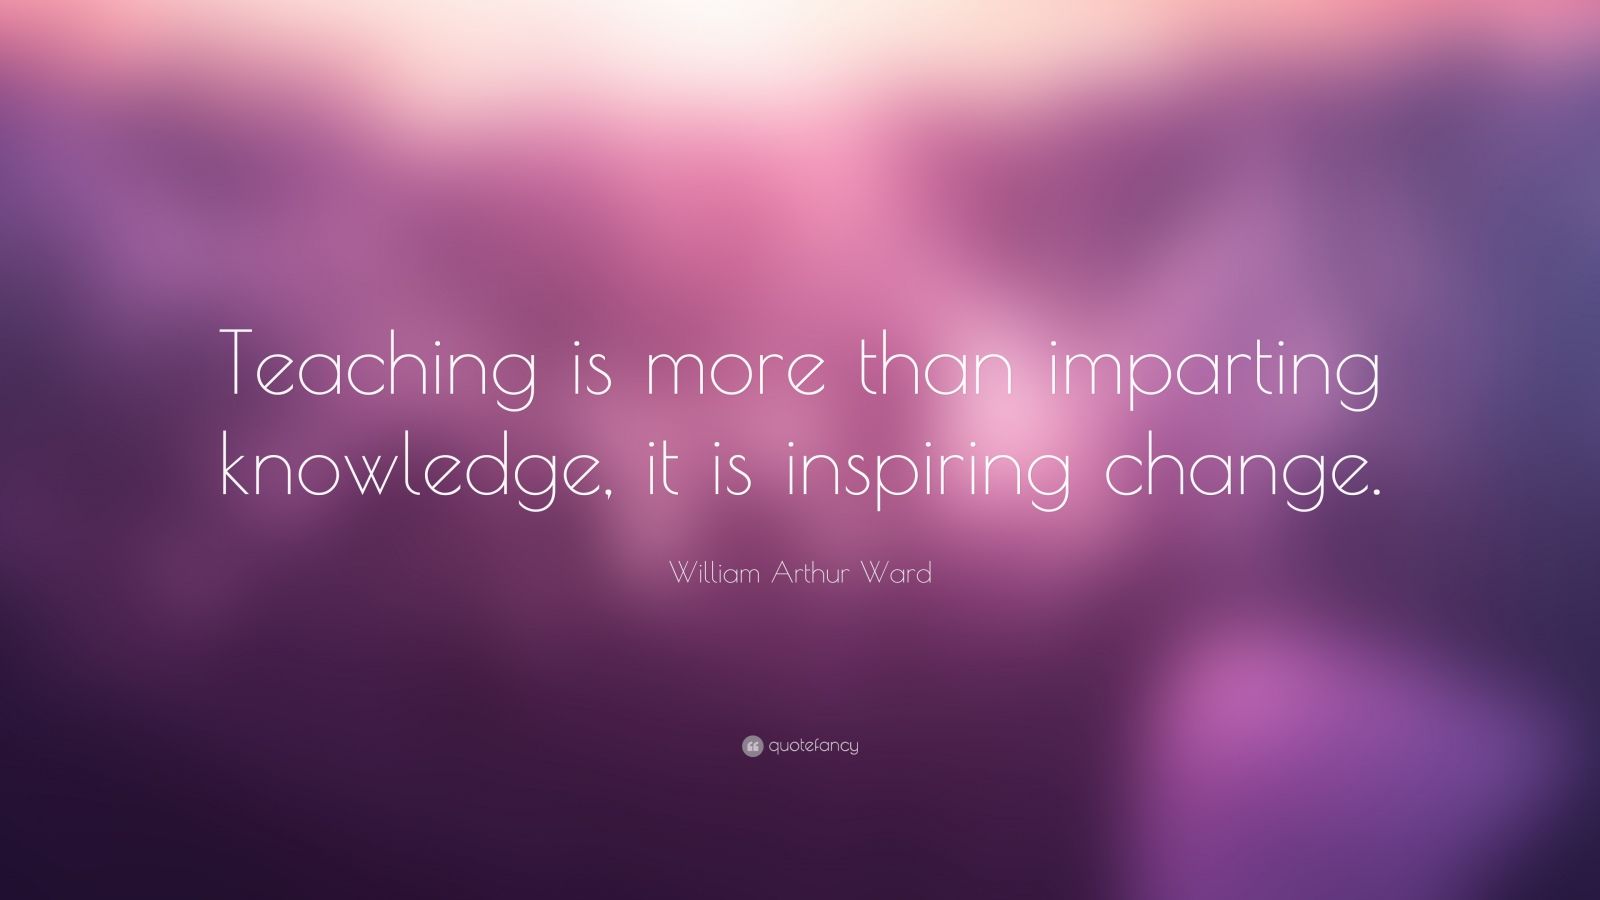 William Arthur Ward Quote: “Teaching is more than imparting knowledge